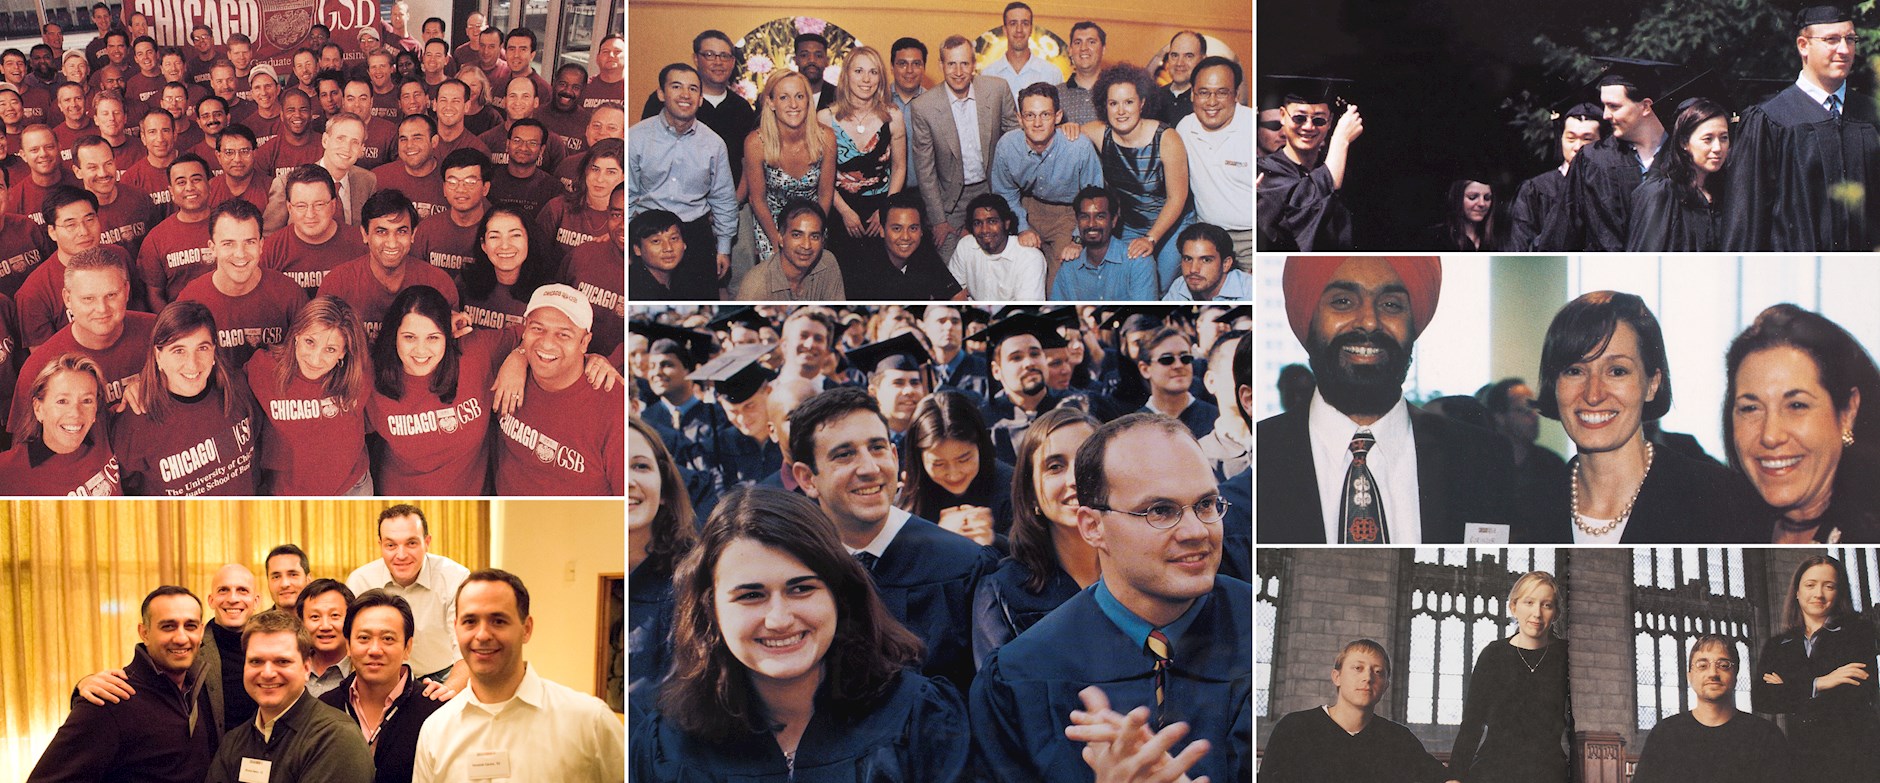 Collage of Class of 2002 Photos